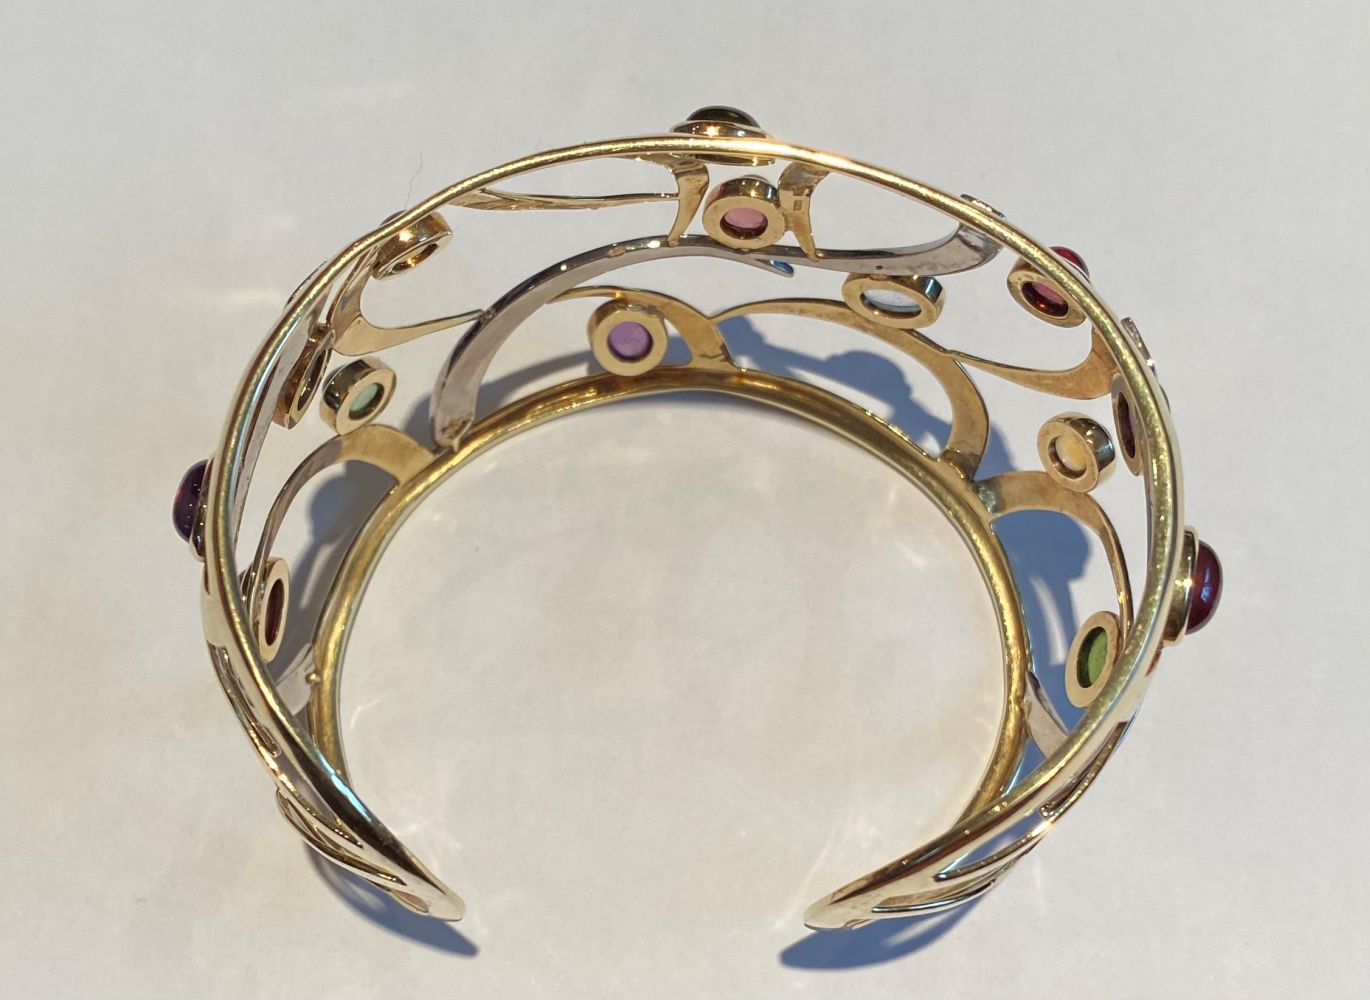 A 14CT YELLOW GOLD OPEN WORK CONTEMPORARY DESIGN BANGLE, mounted with 15 cabochon amethyst, - Image 3 of 8